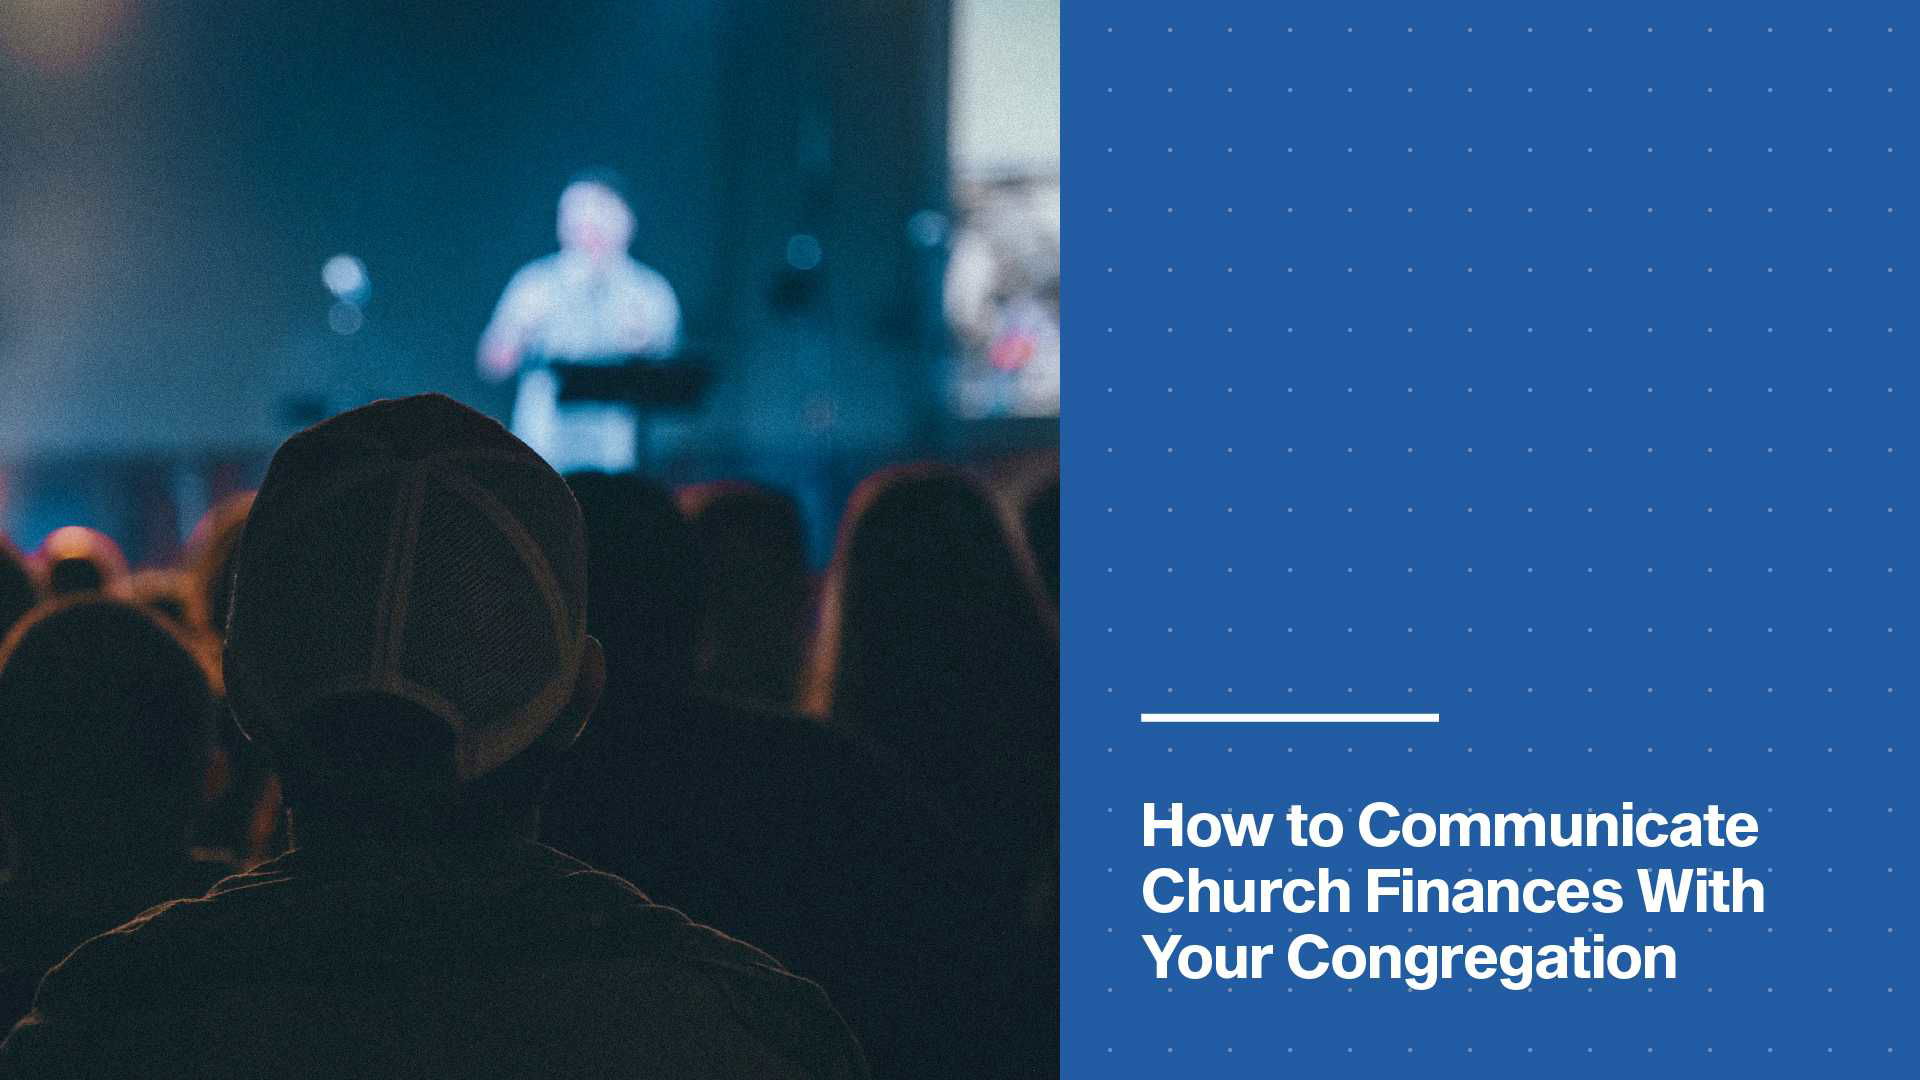 How to Communicate Church Finances With Your Congregation